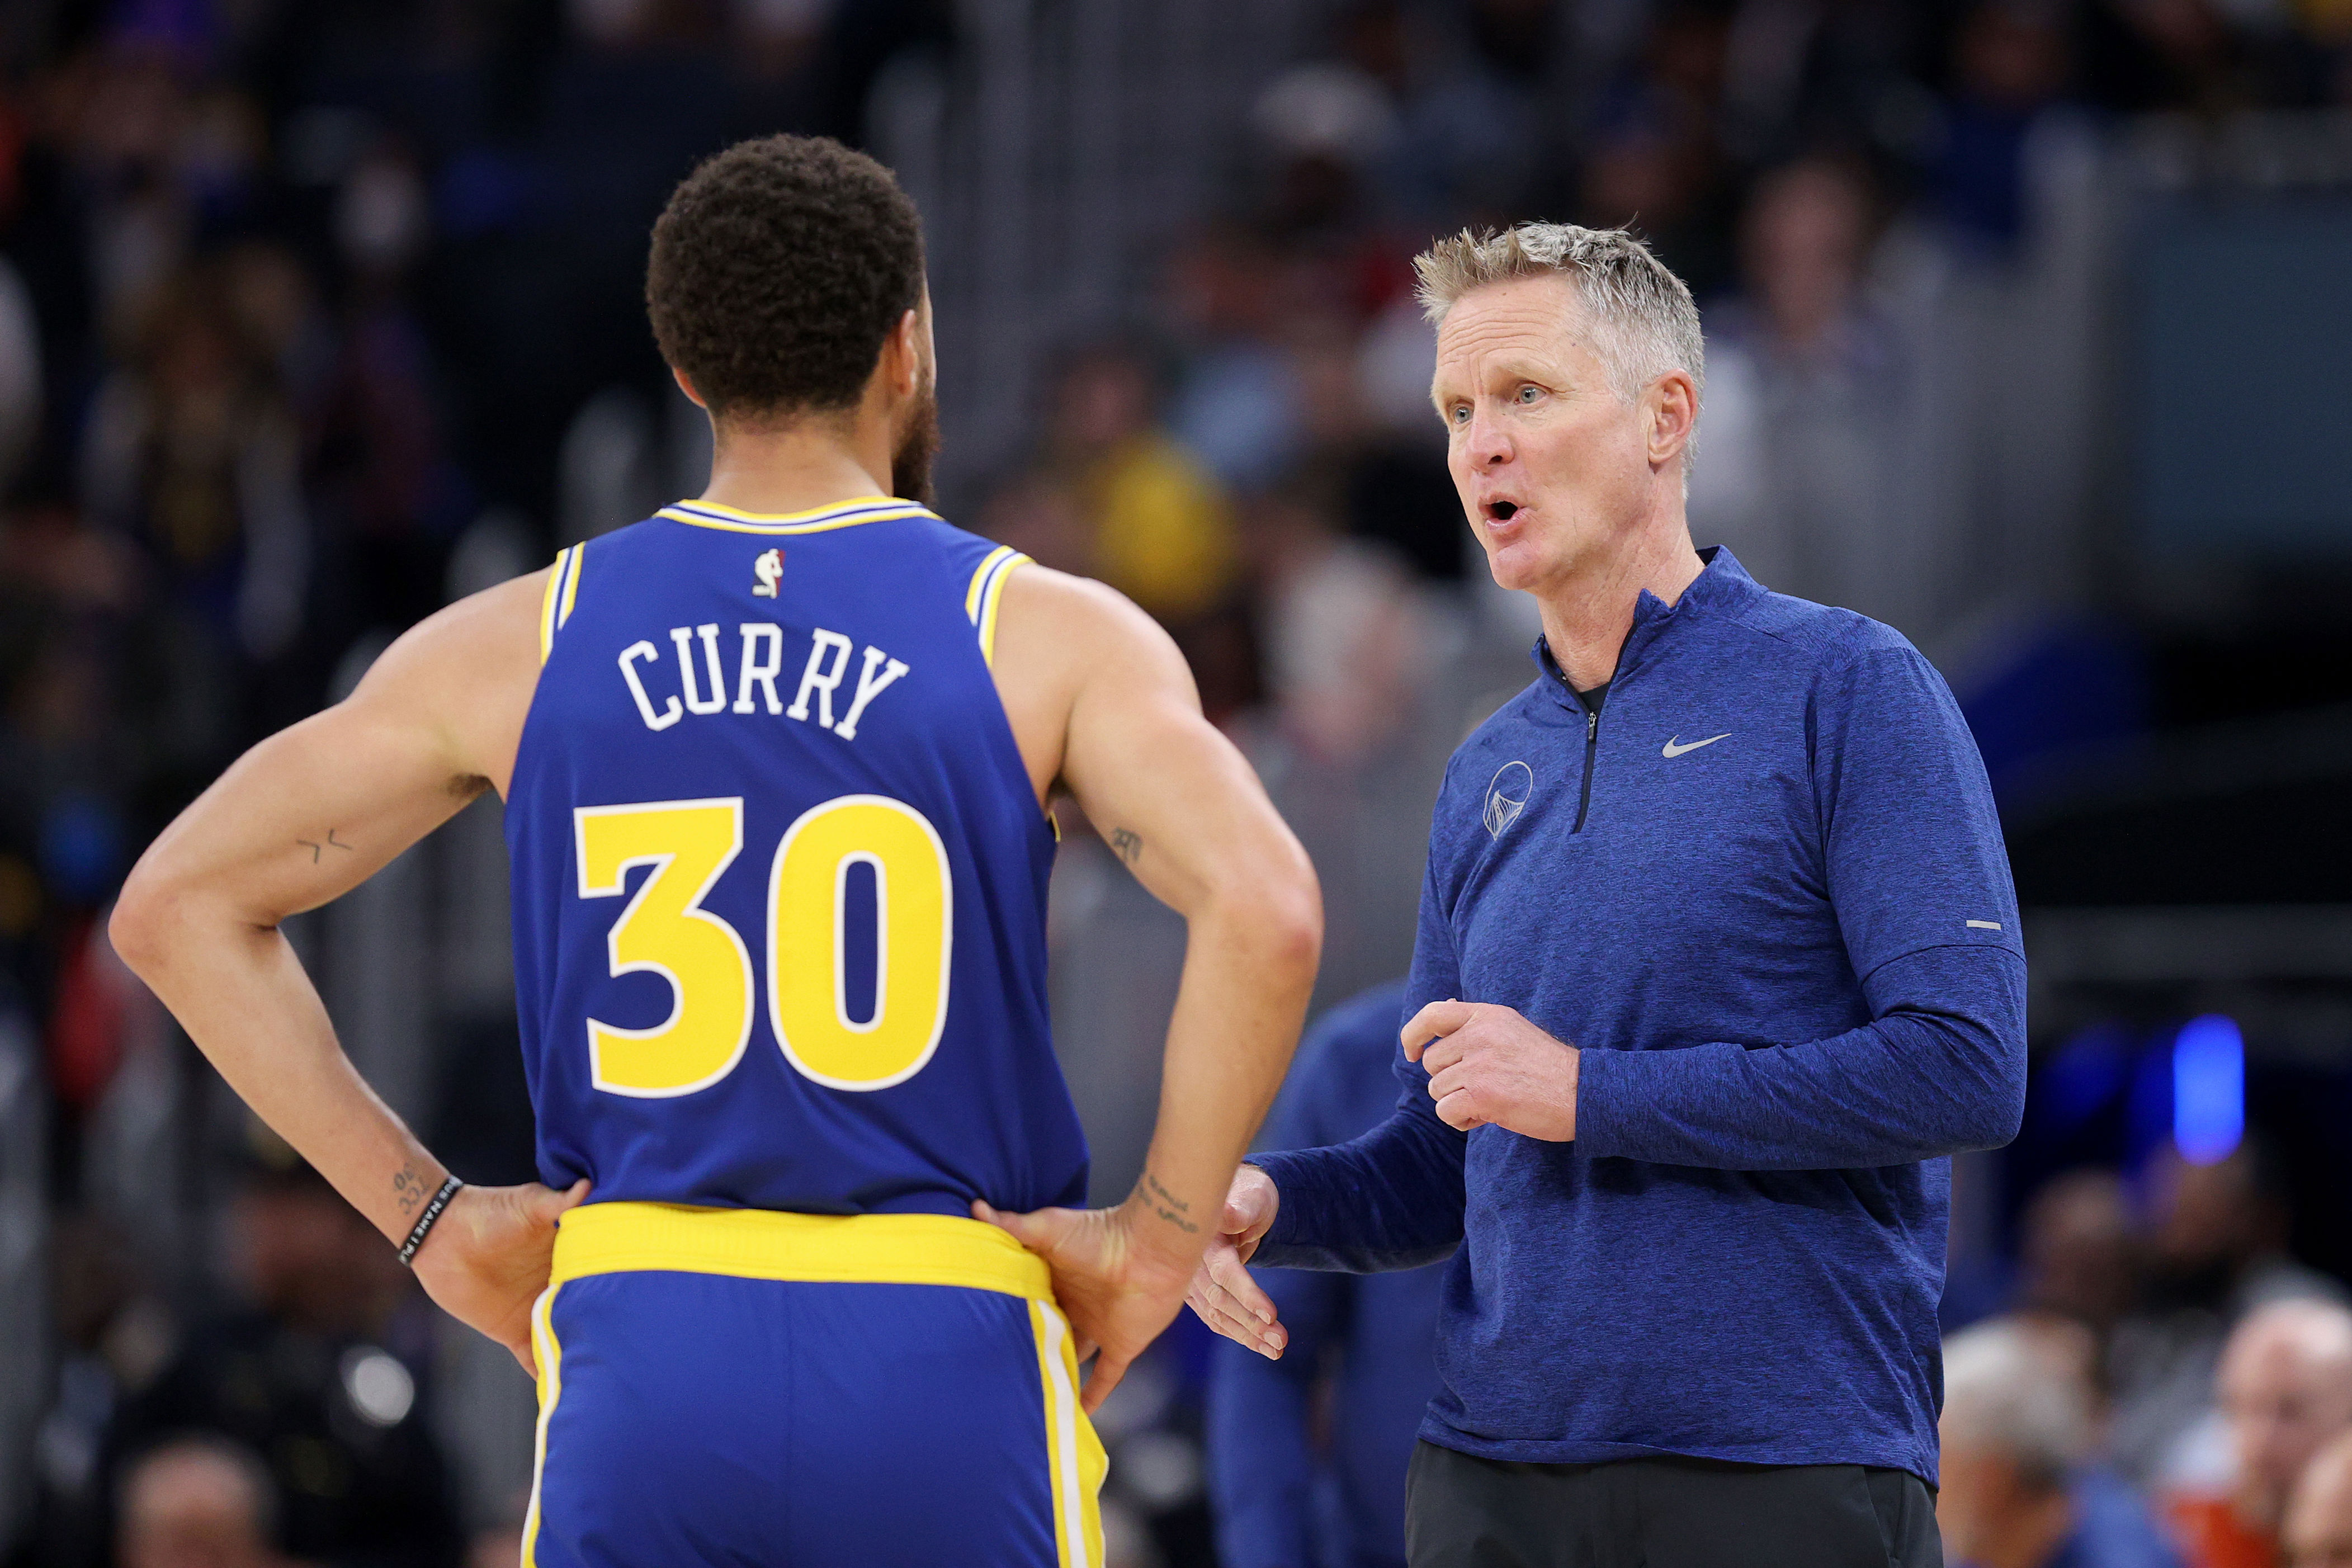 Steph Curry credits Steve Kerr for his shooting record in the NBA